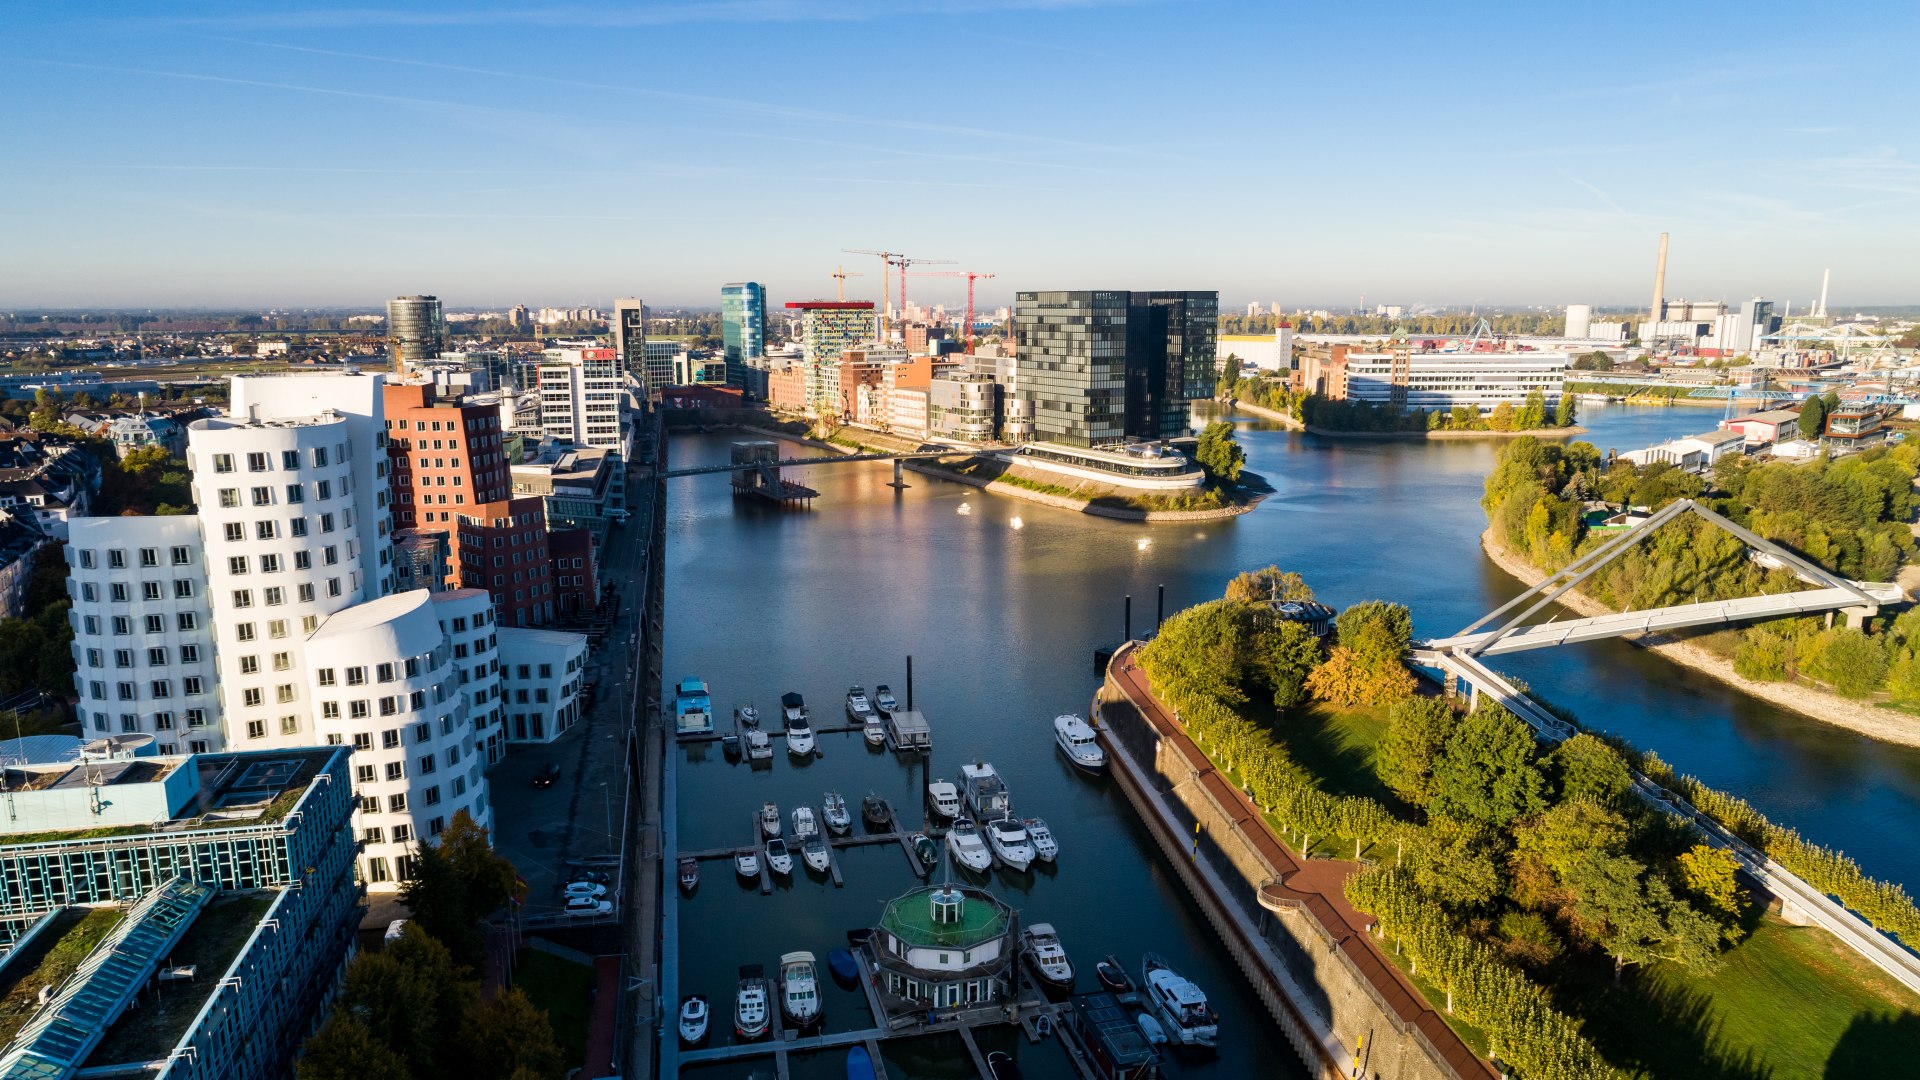 The Medienhafen in Düsseldorf with the famous Gehry
architecture., © Tourismus NRW e.V.